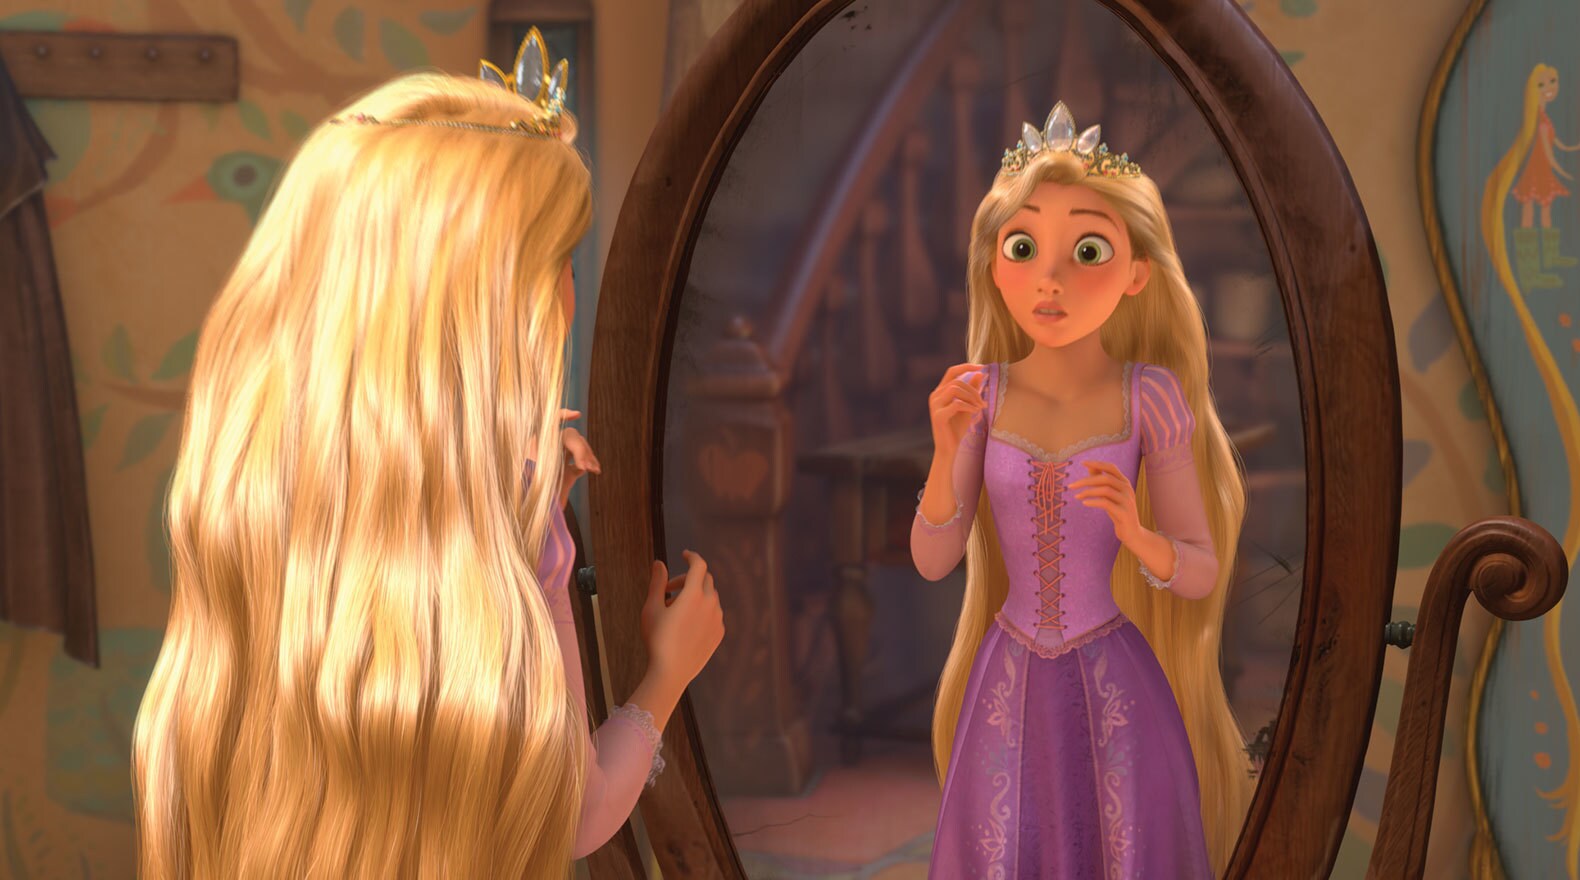 Rapunzel voiced by Mandy Moore wearing a crown and looking into a mirror